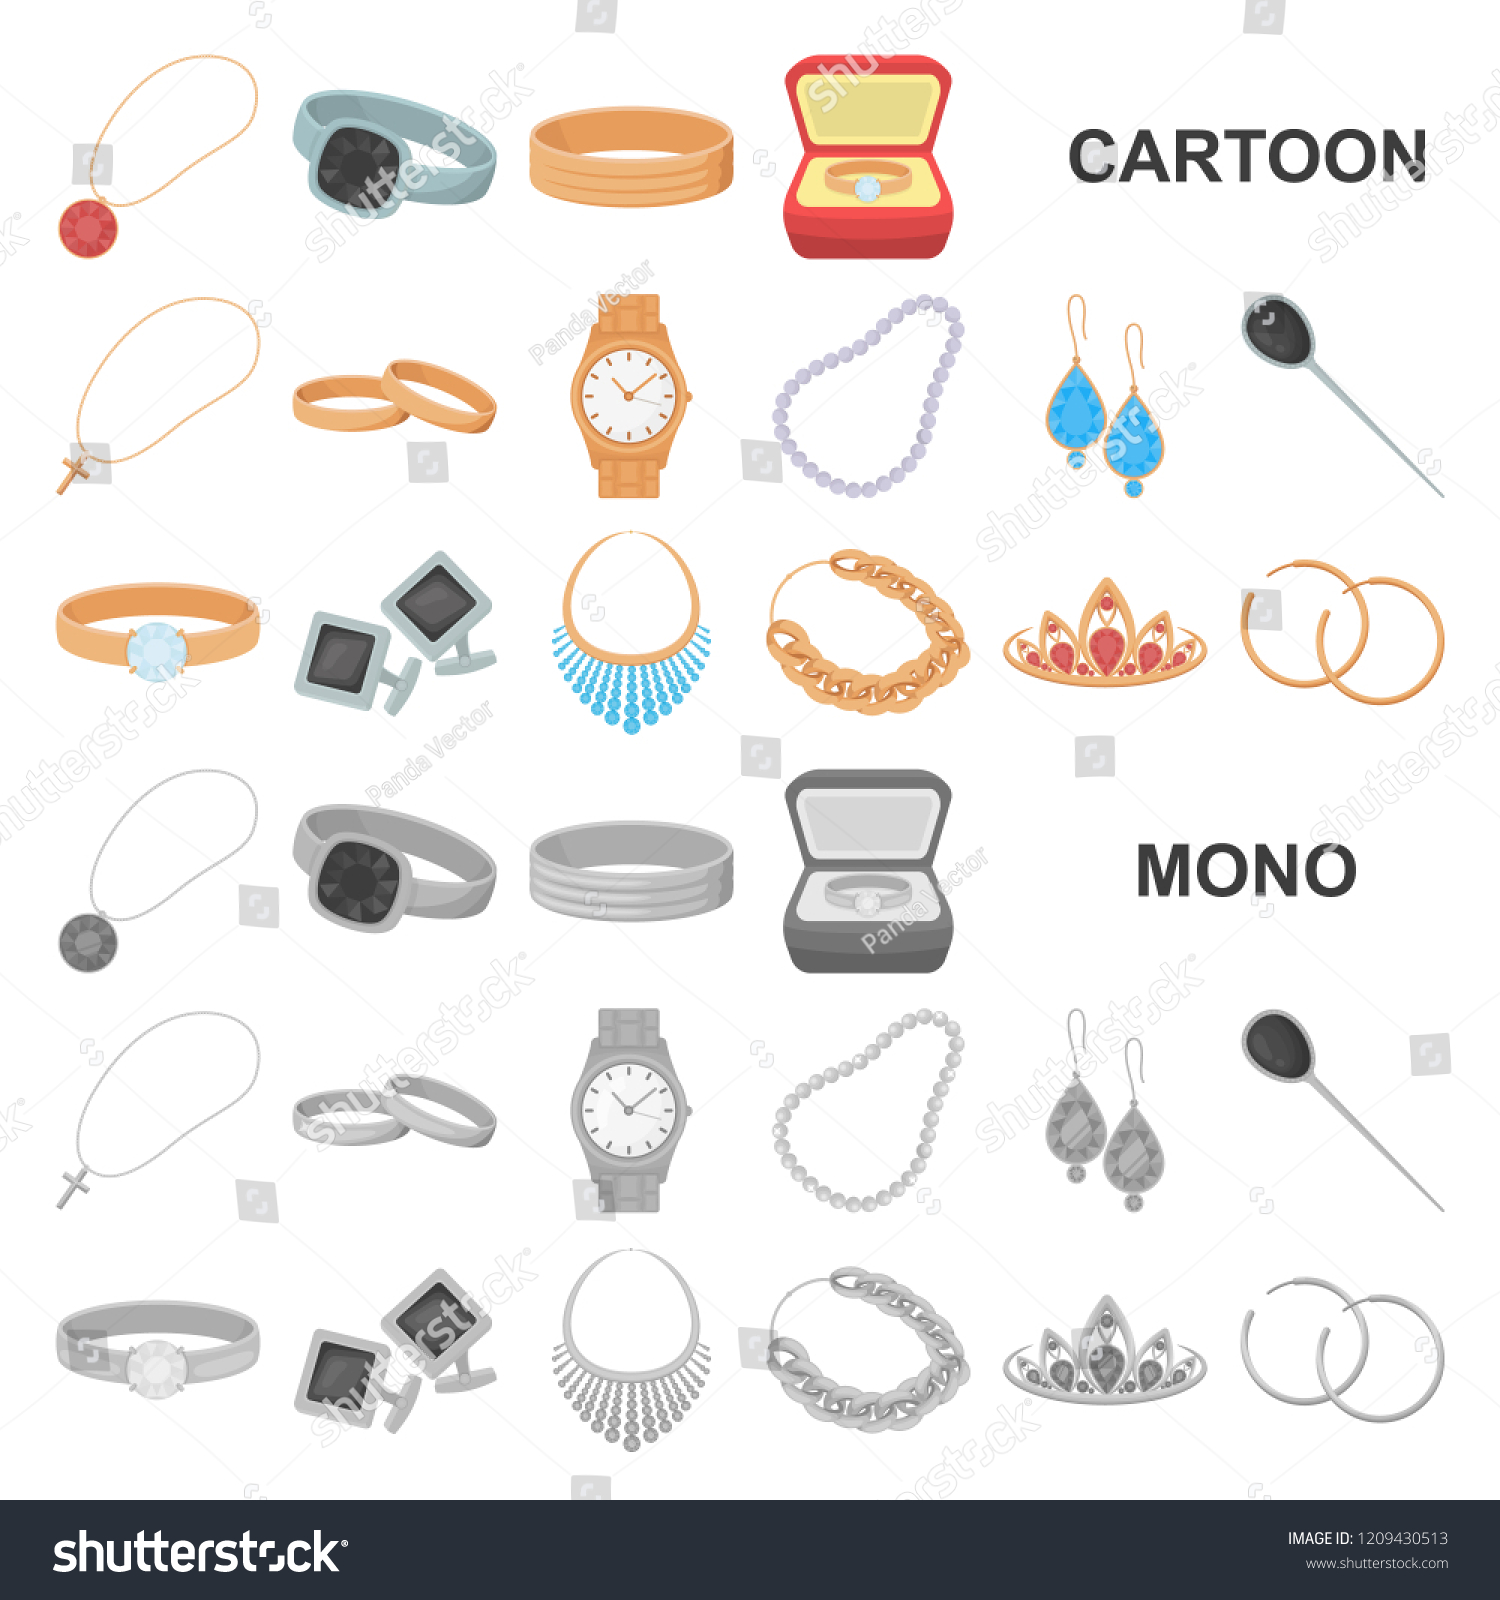 Jewelry and accessories cartoon icons in set - Royalty Free Stock ...